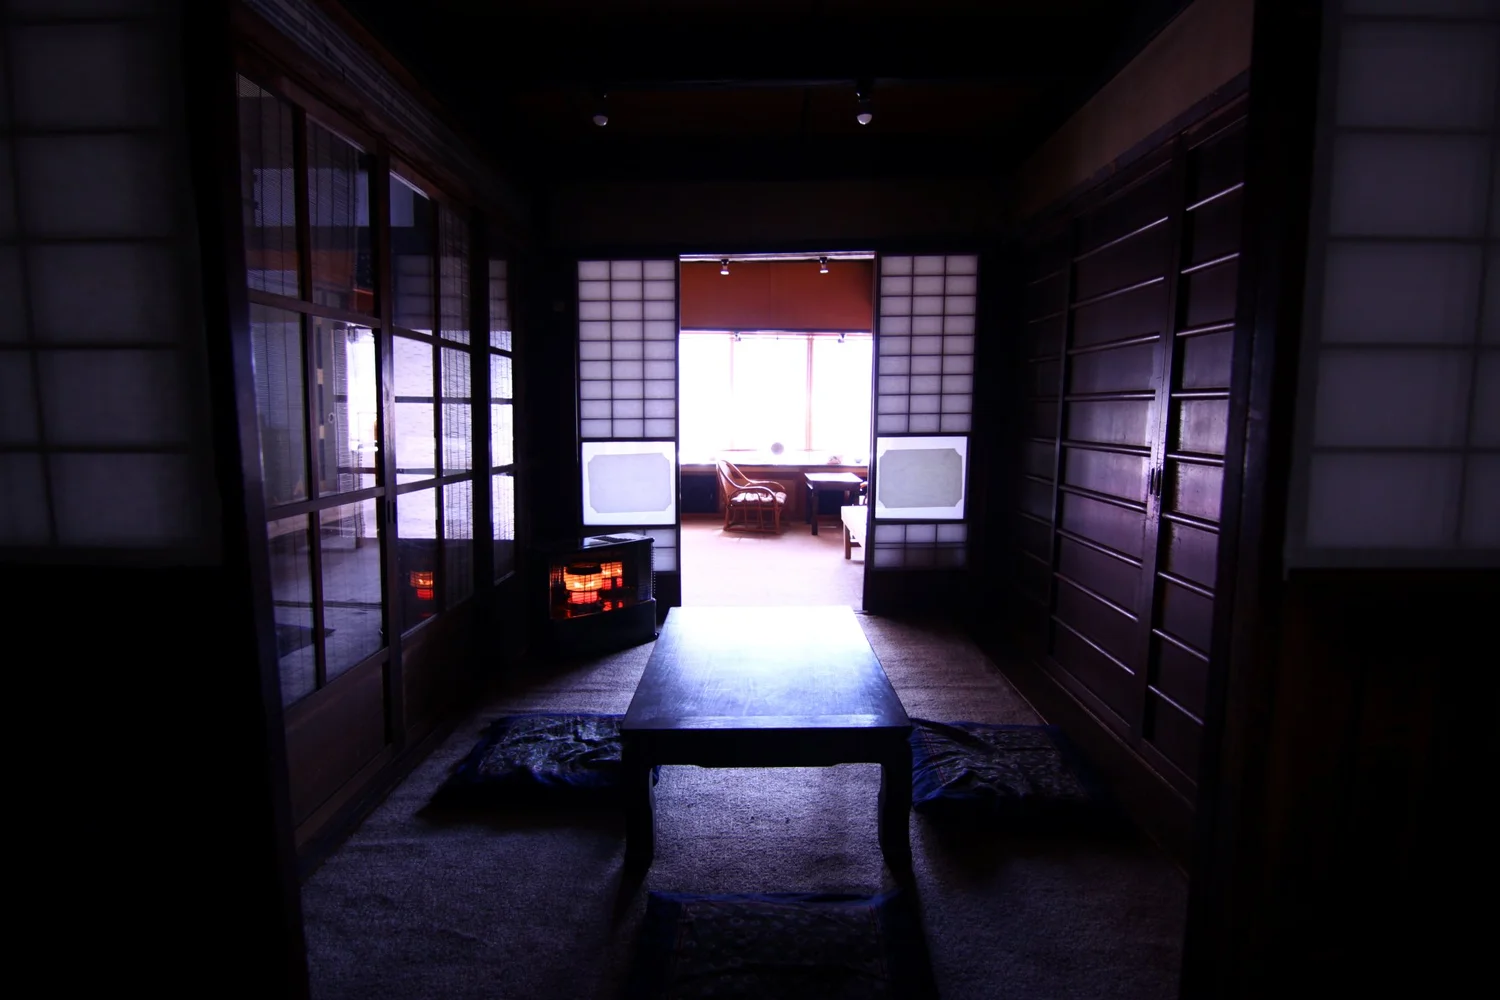 Take a Koto Lesson at a Traditional House in Kyoto